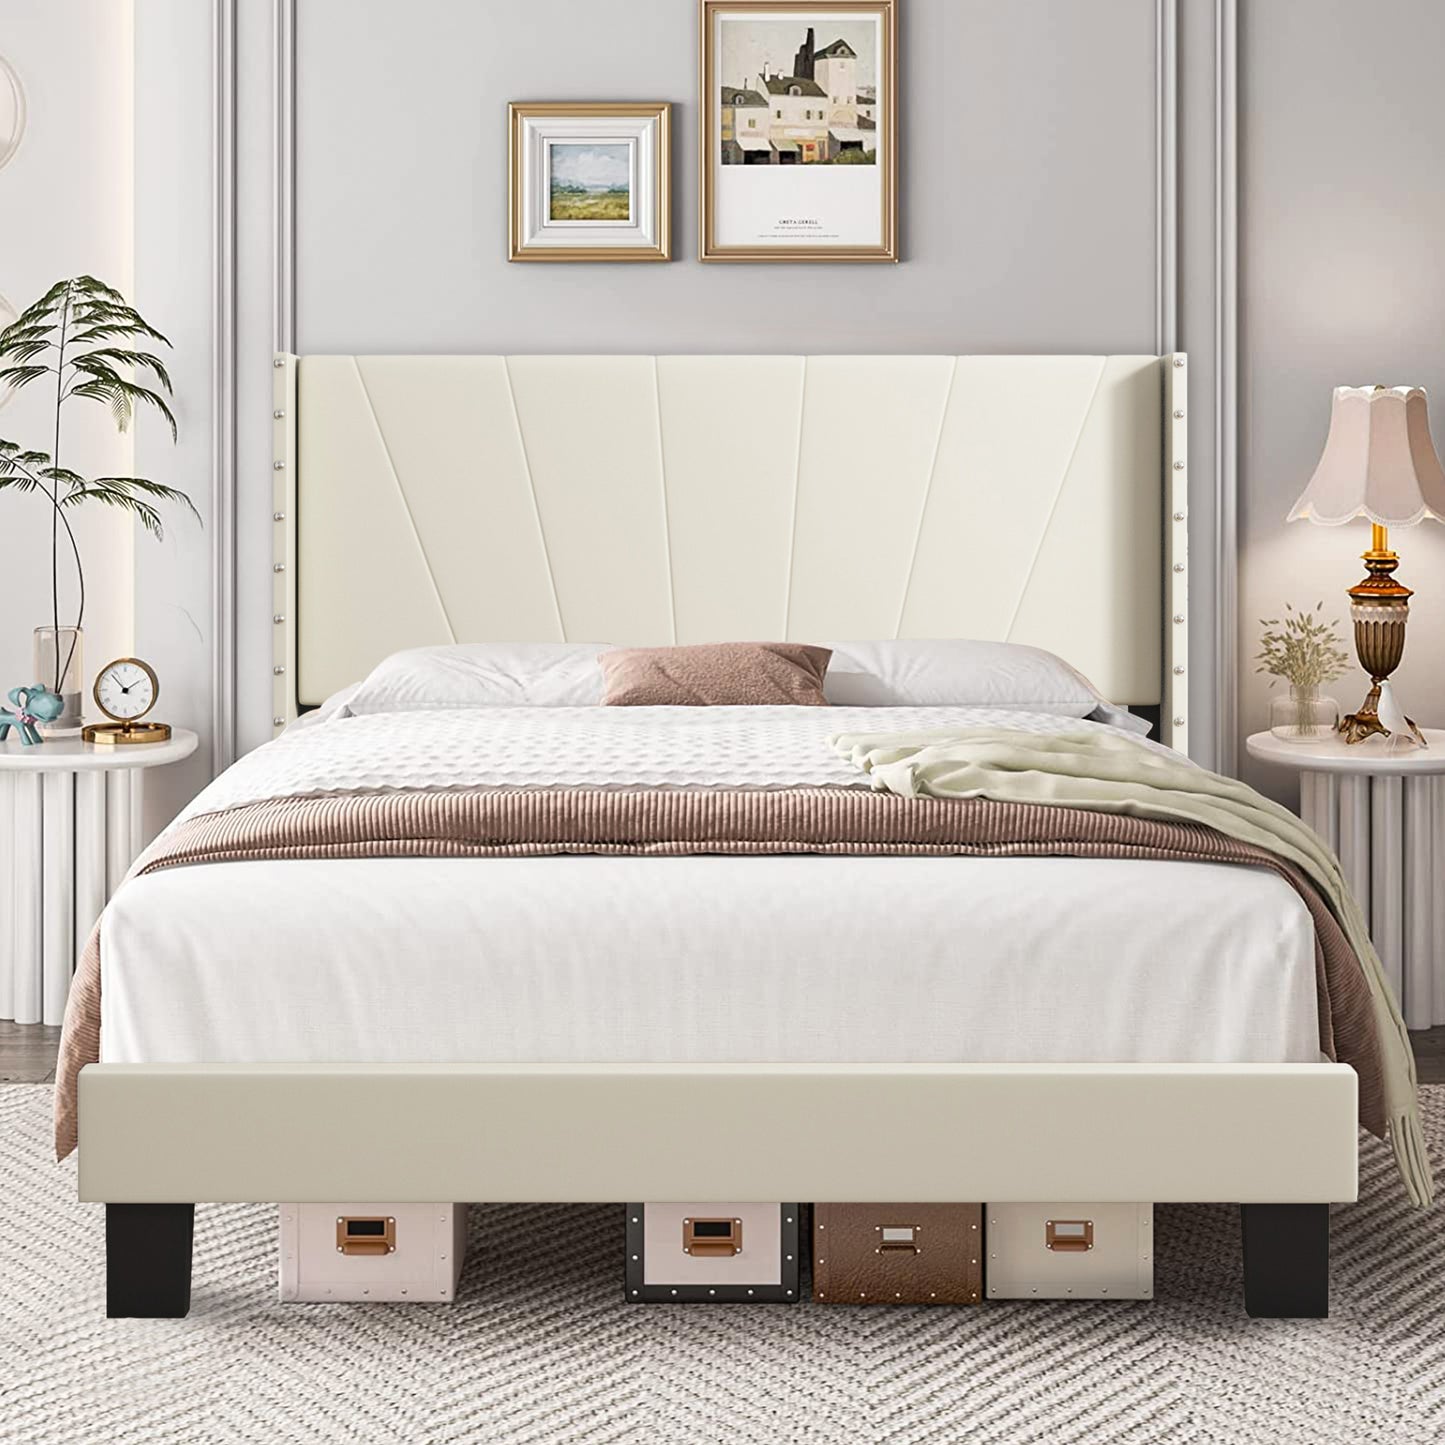 SYNGAR Blue Fabric Upholstered Platform Bed Frame Queen Size with Button Tufted Headboard, Mattress Foundation Metal Frame with Strong Wood Slat Support, No Box Spring Needed